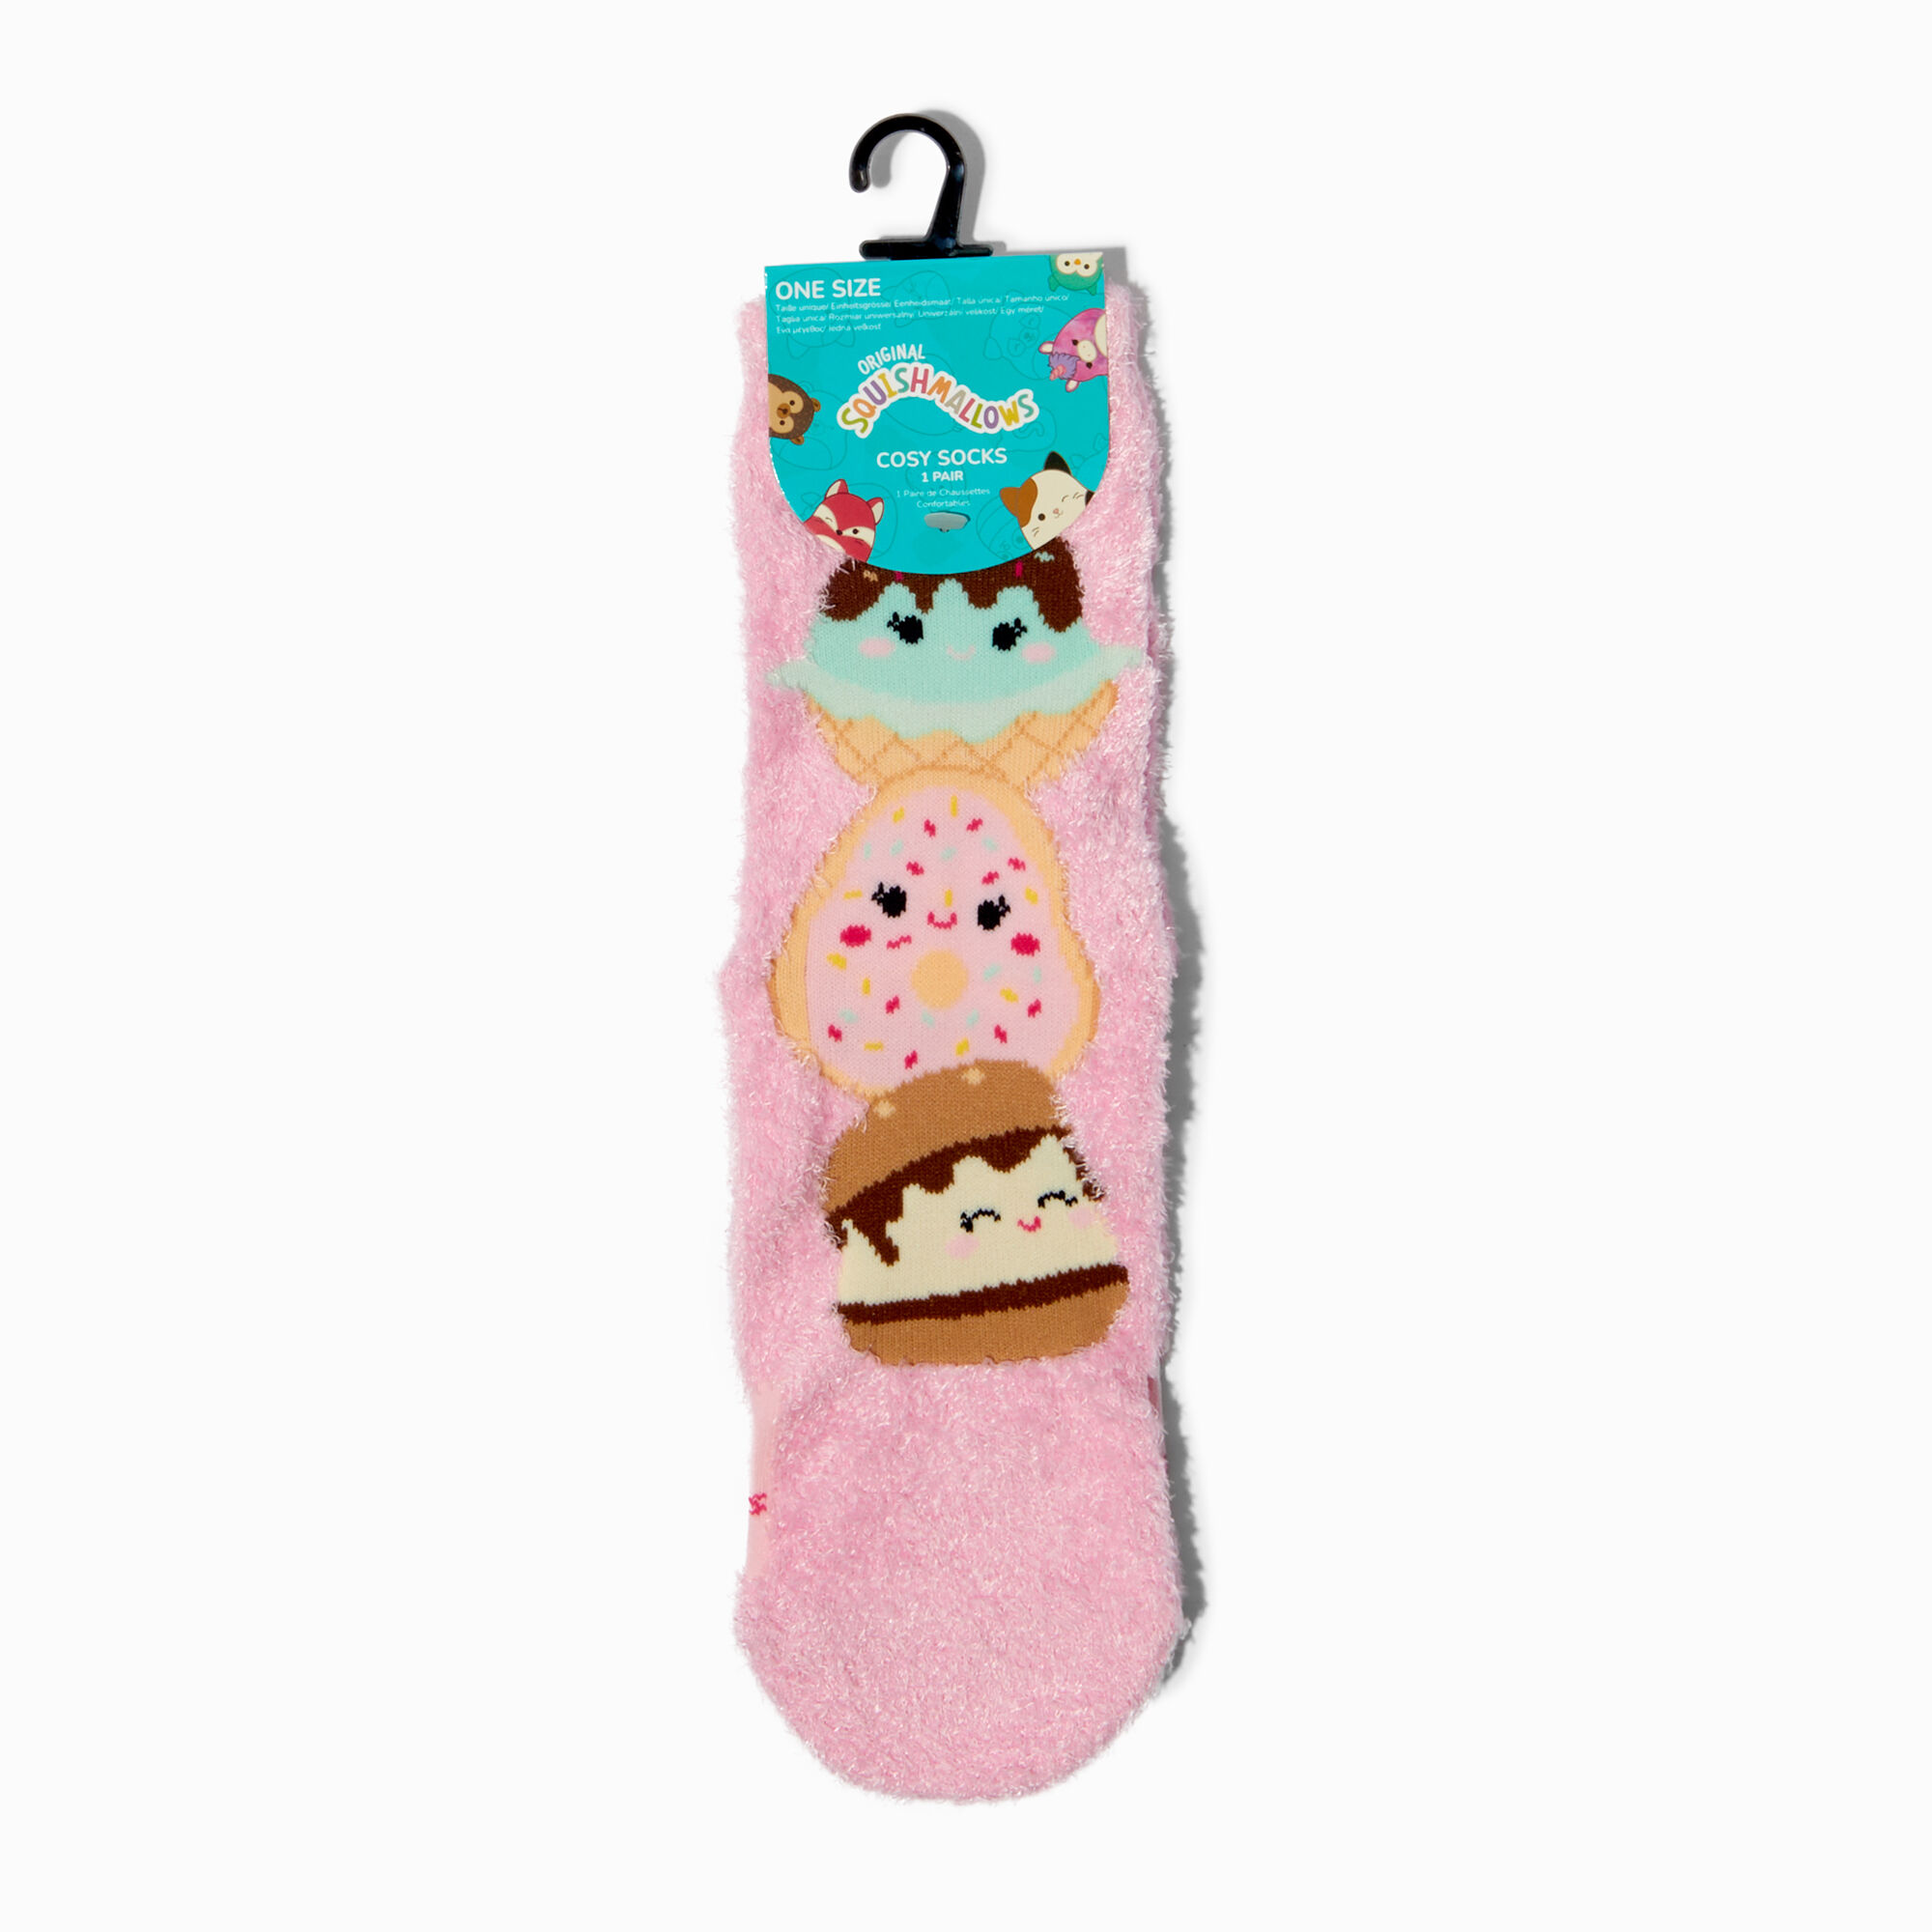 View Claires Squishmallows Cozy Socks 1 Pair information